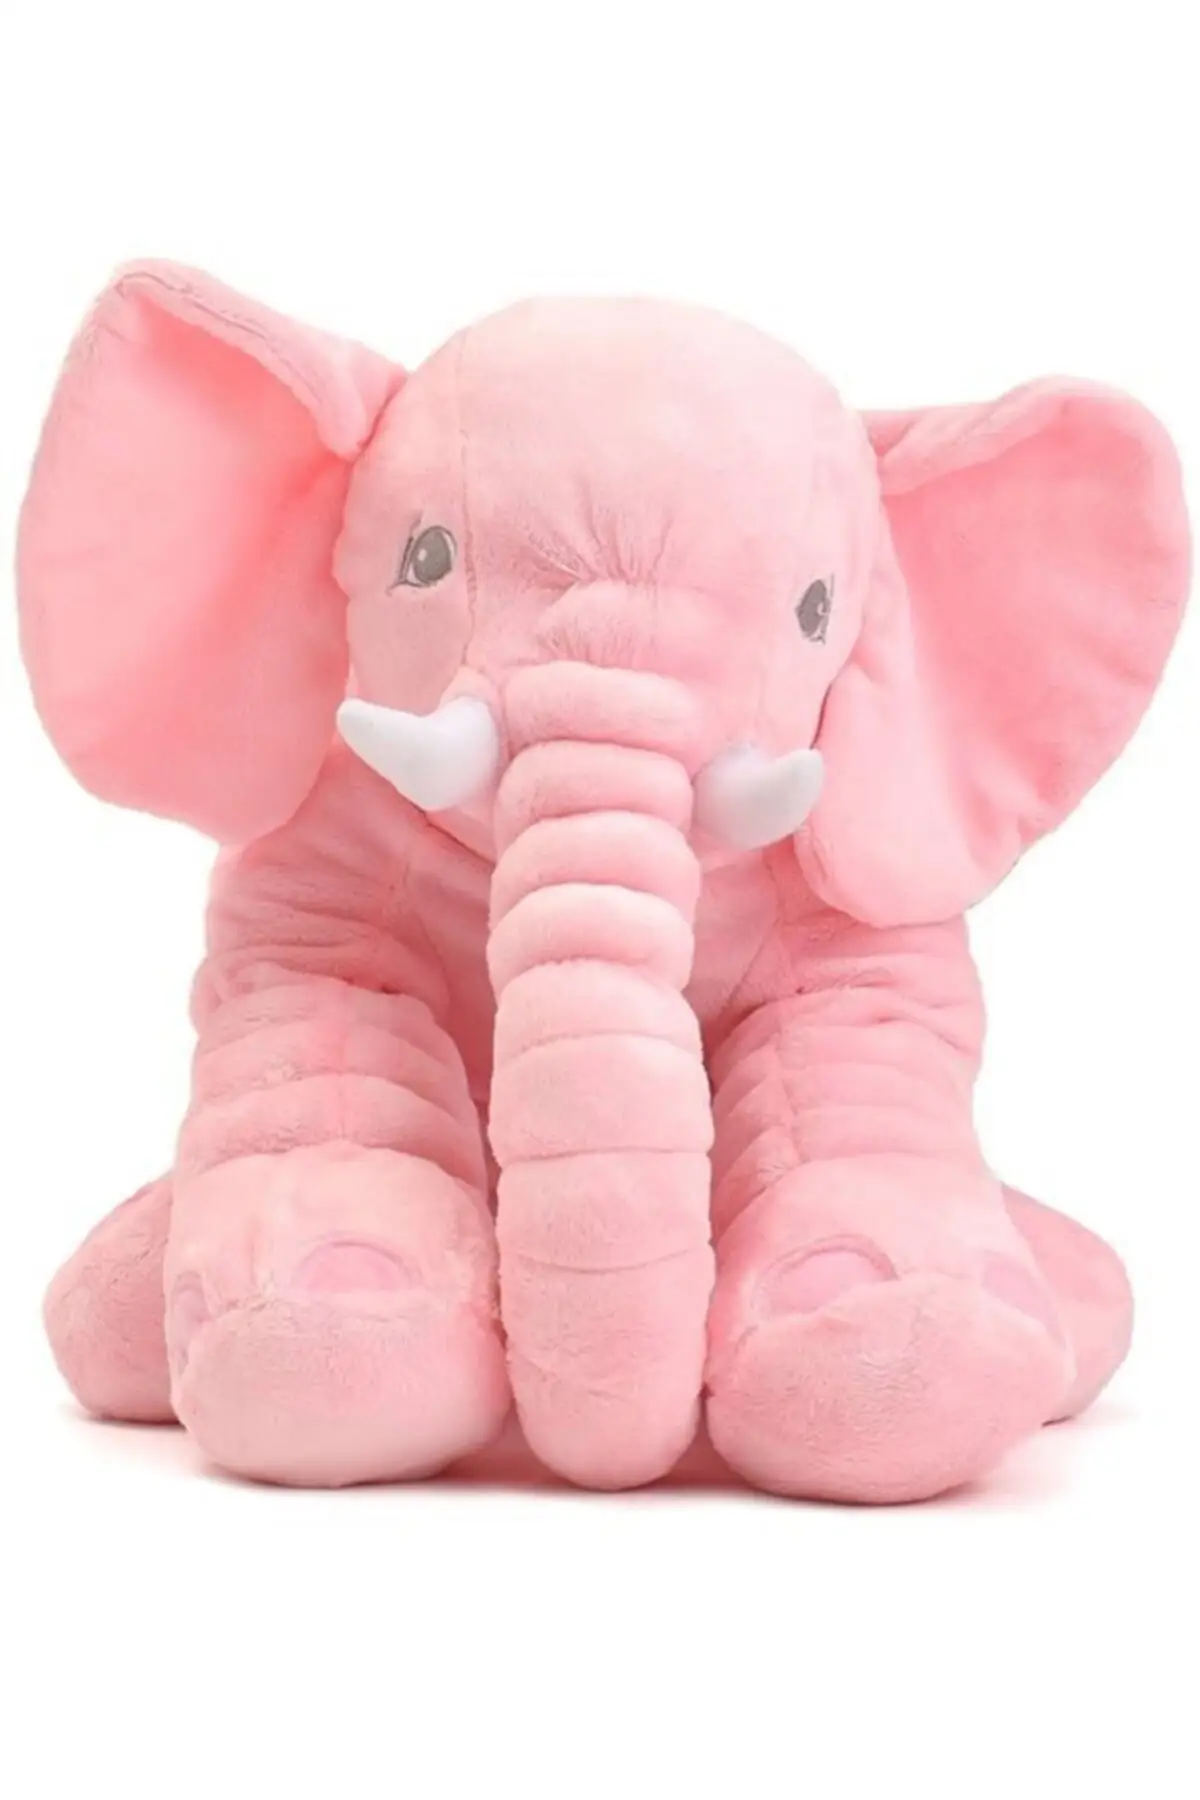 Plush Pink Elephant Design Toy Soft Cute Toy For Kids 65 cm Length Pillow Gift Items